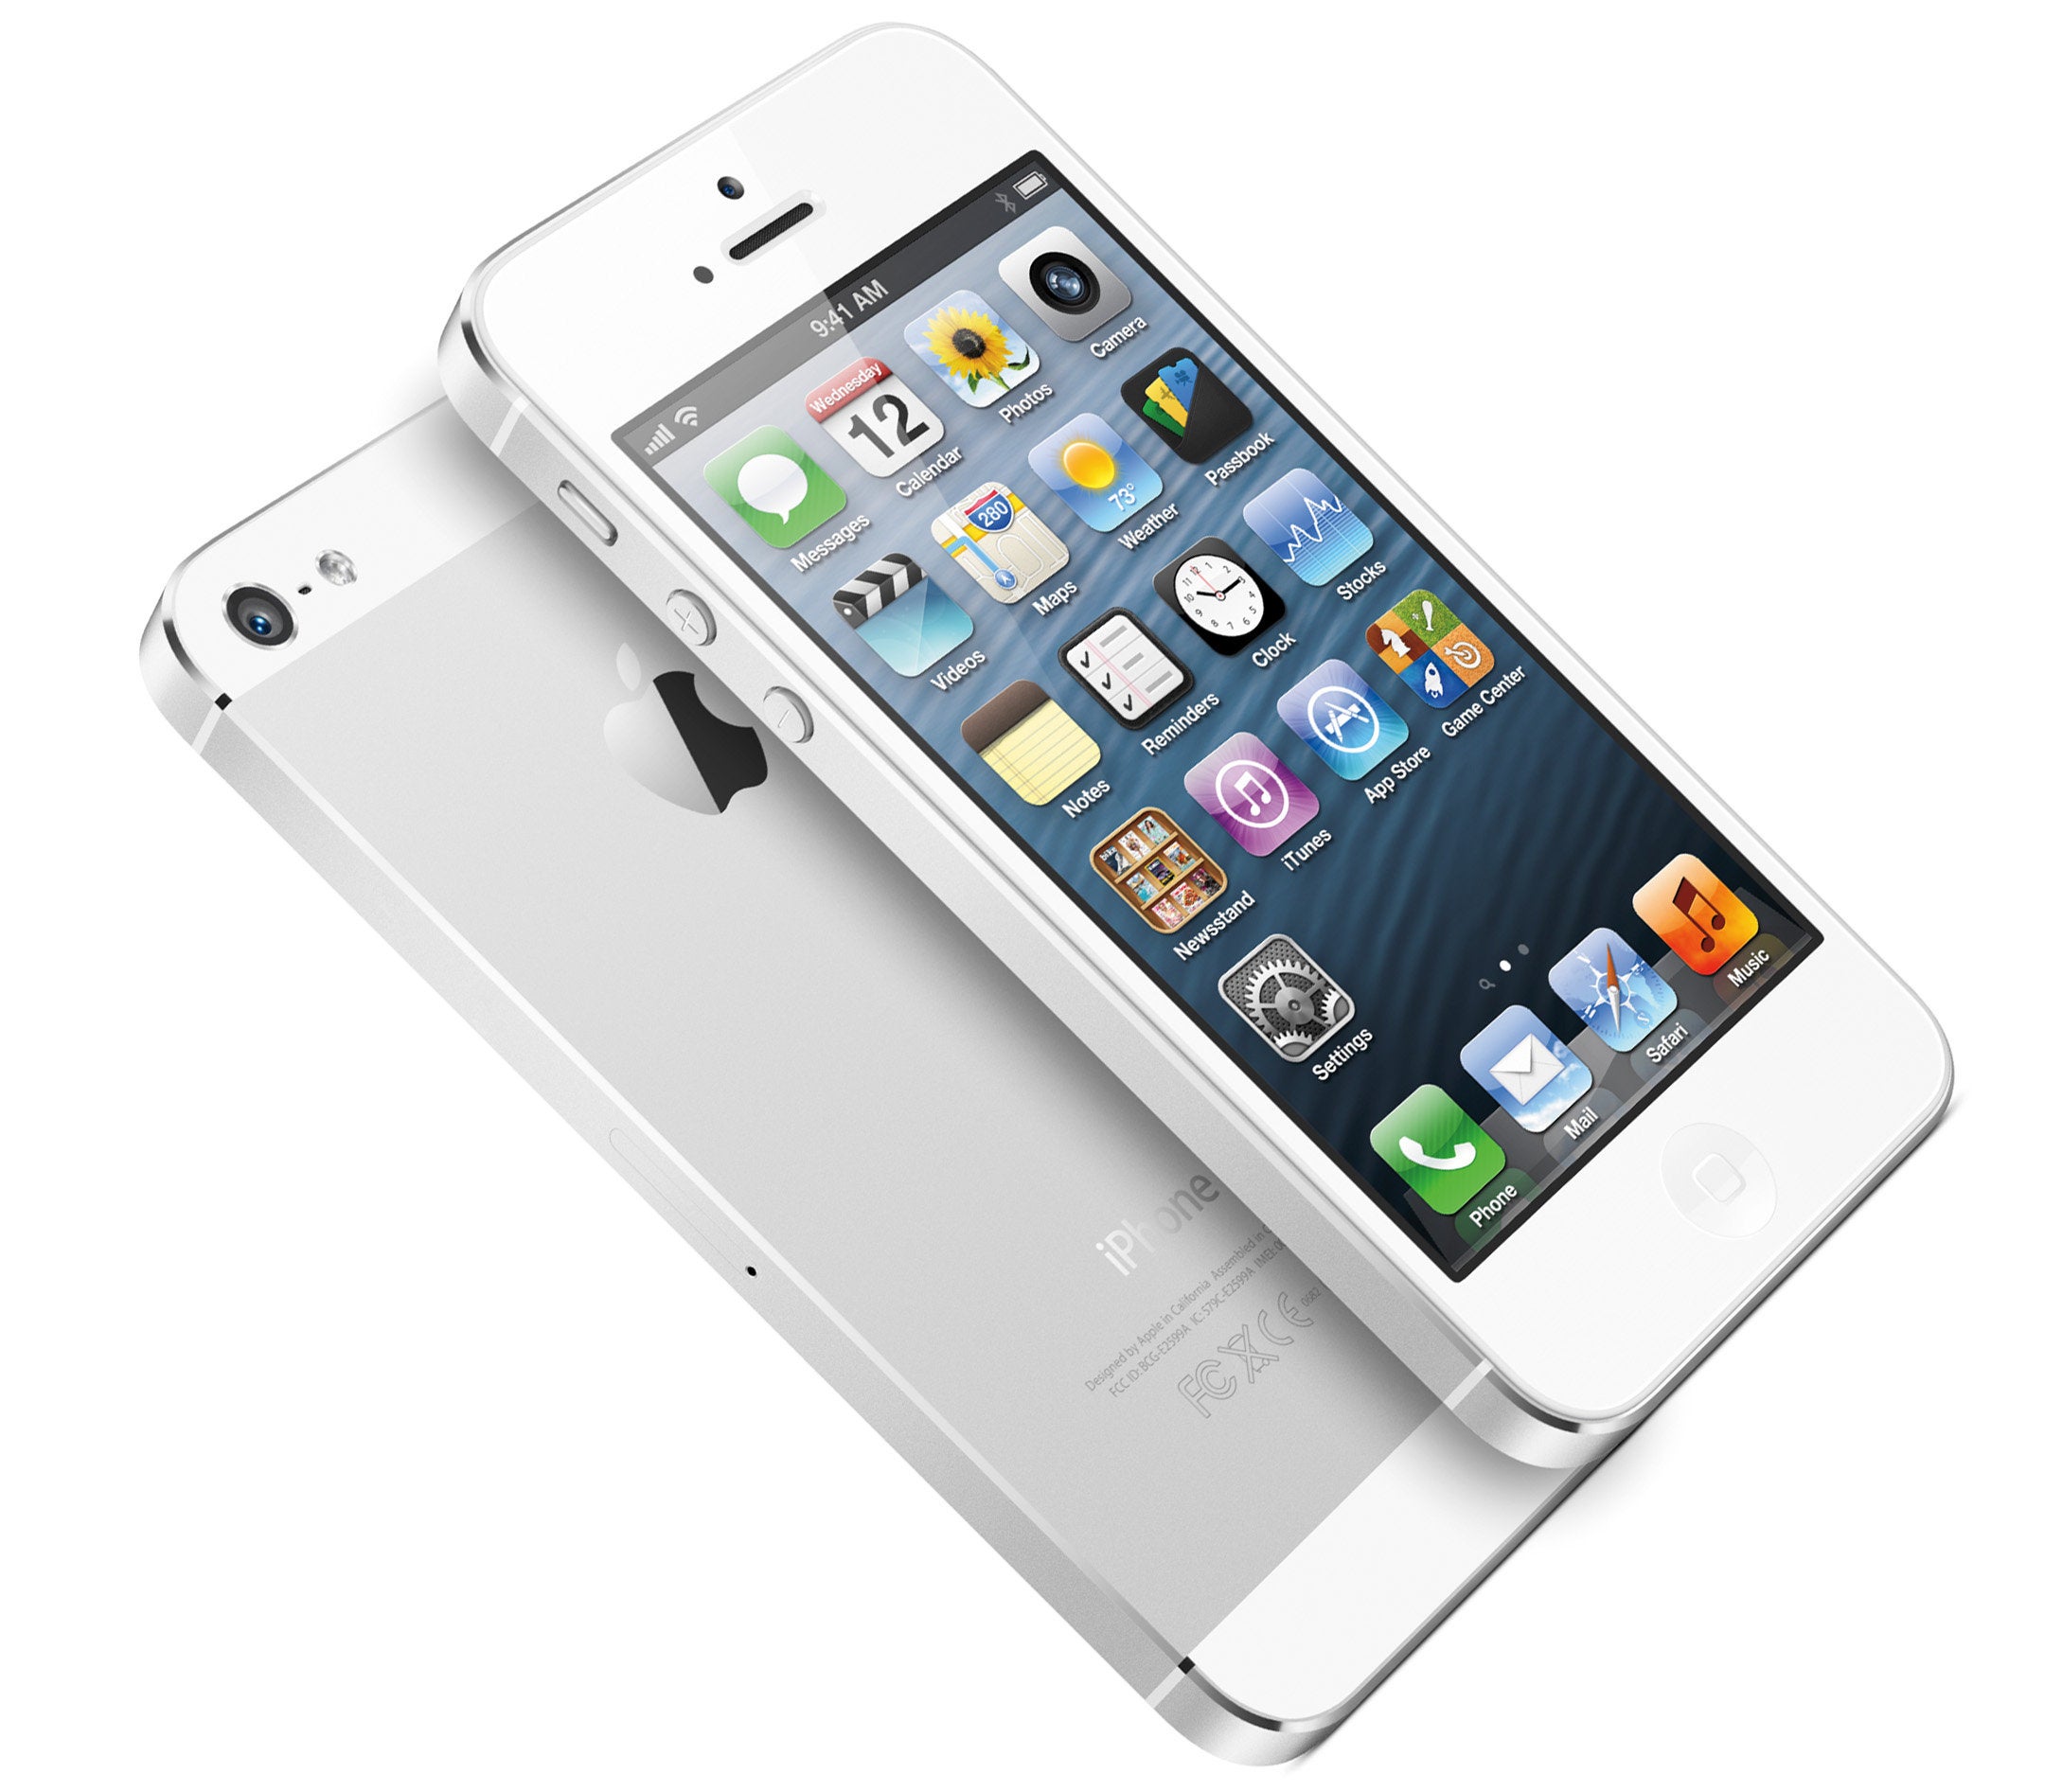 The Apple iPhone 5 will be available for pre-paid carrier Straight Talk - Straight Talk gets the Apple iPhone 5 on January 11th